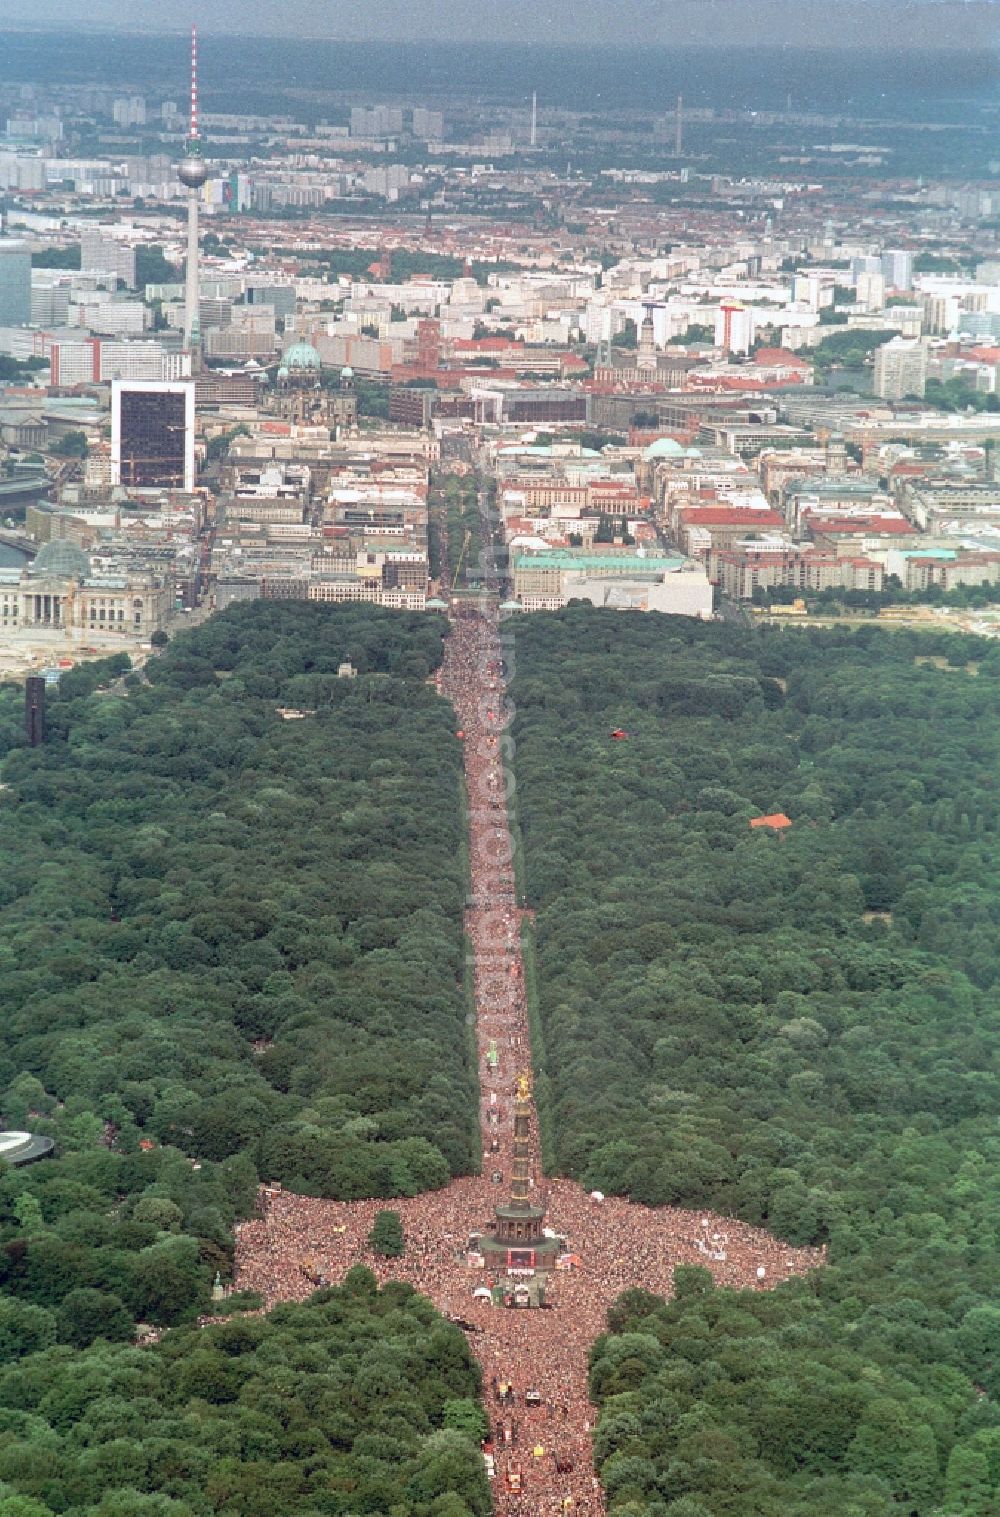 Berlin from the bird's eye view: Participants in the Love Parade music festival on the event concert area on the Great Star at the Victory Column and the Strasse des 17. Juni in the district Tiergarten in Berlin, Germany